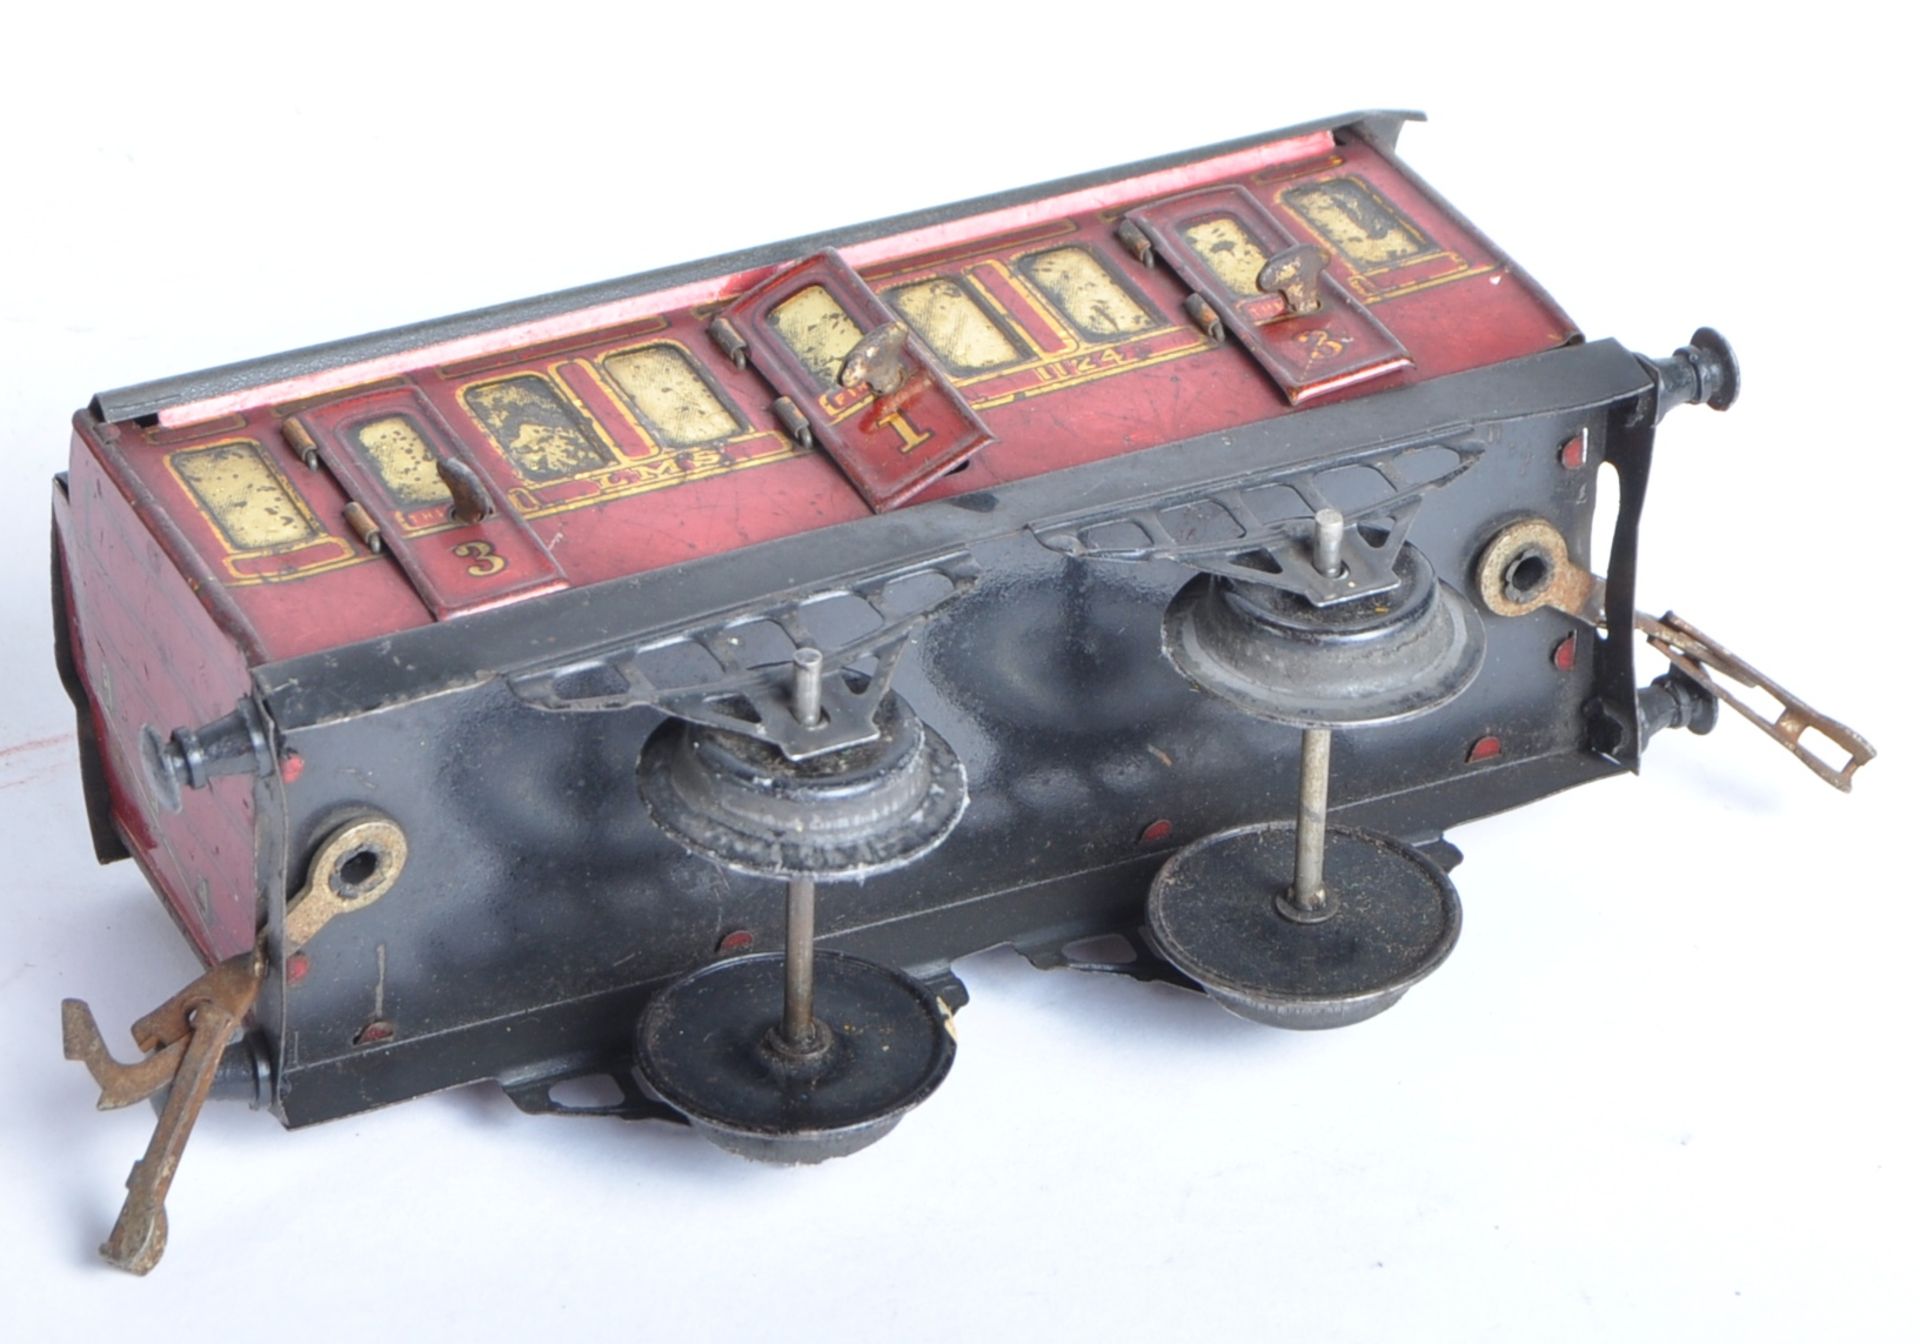 COLLECTION OF VINTAGE HORNBY O GAUGE TINPLATE RAILWAY CARRIAGES - Image 5 of 7